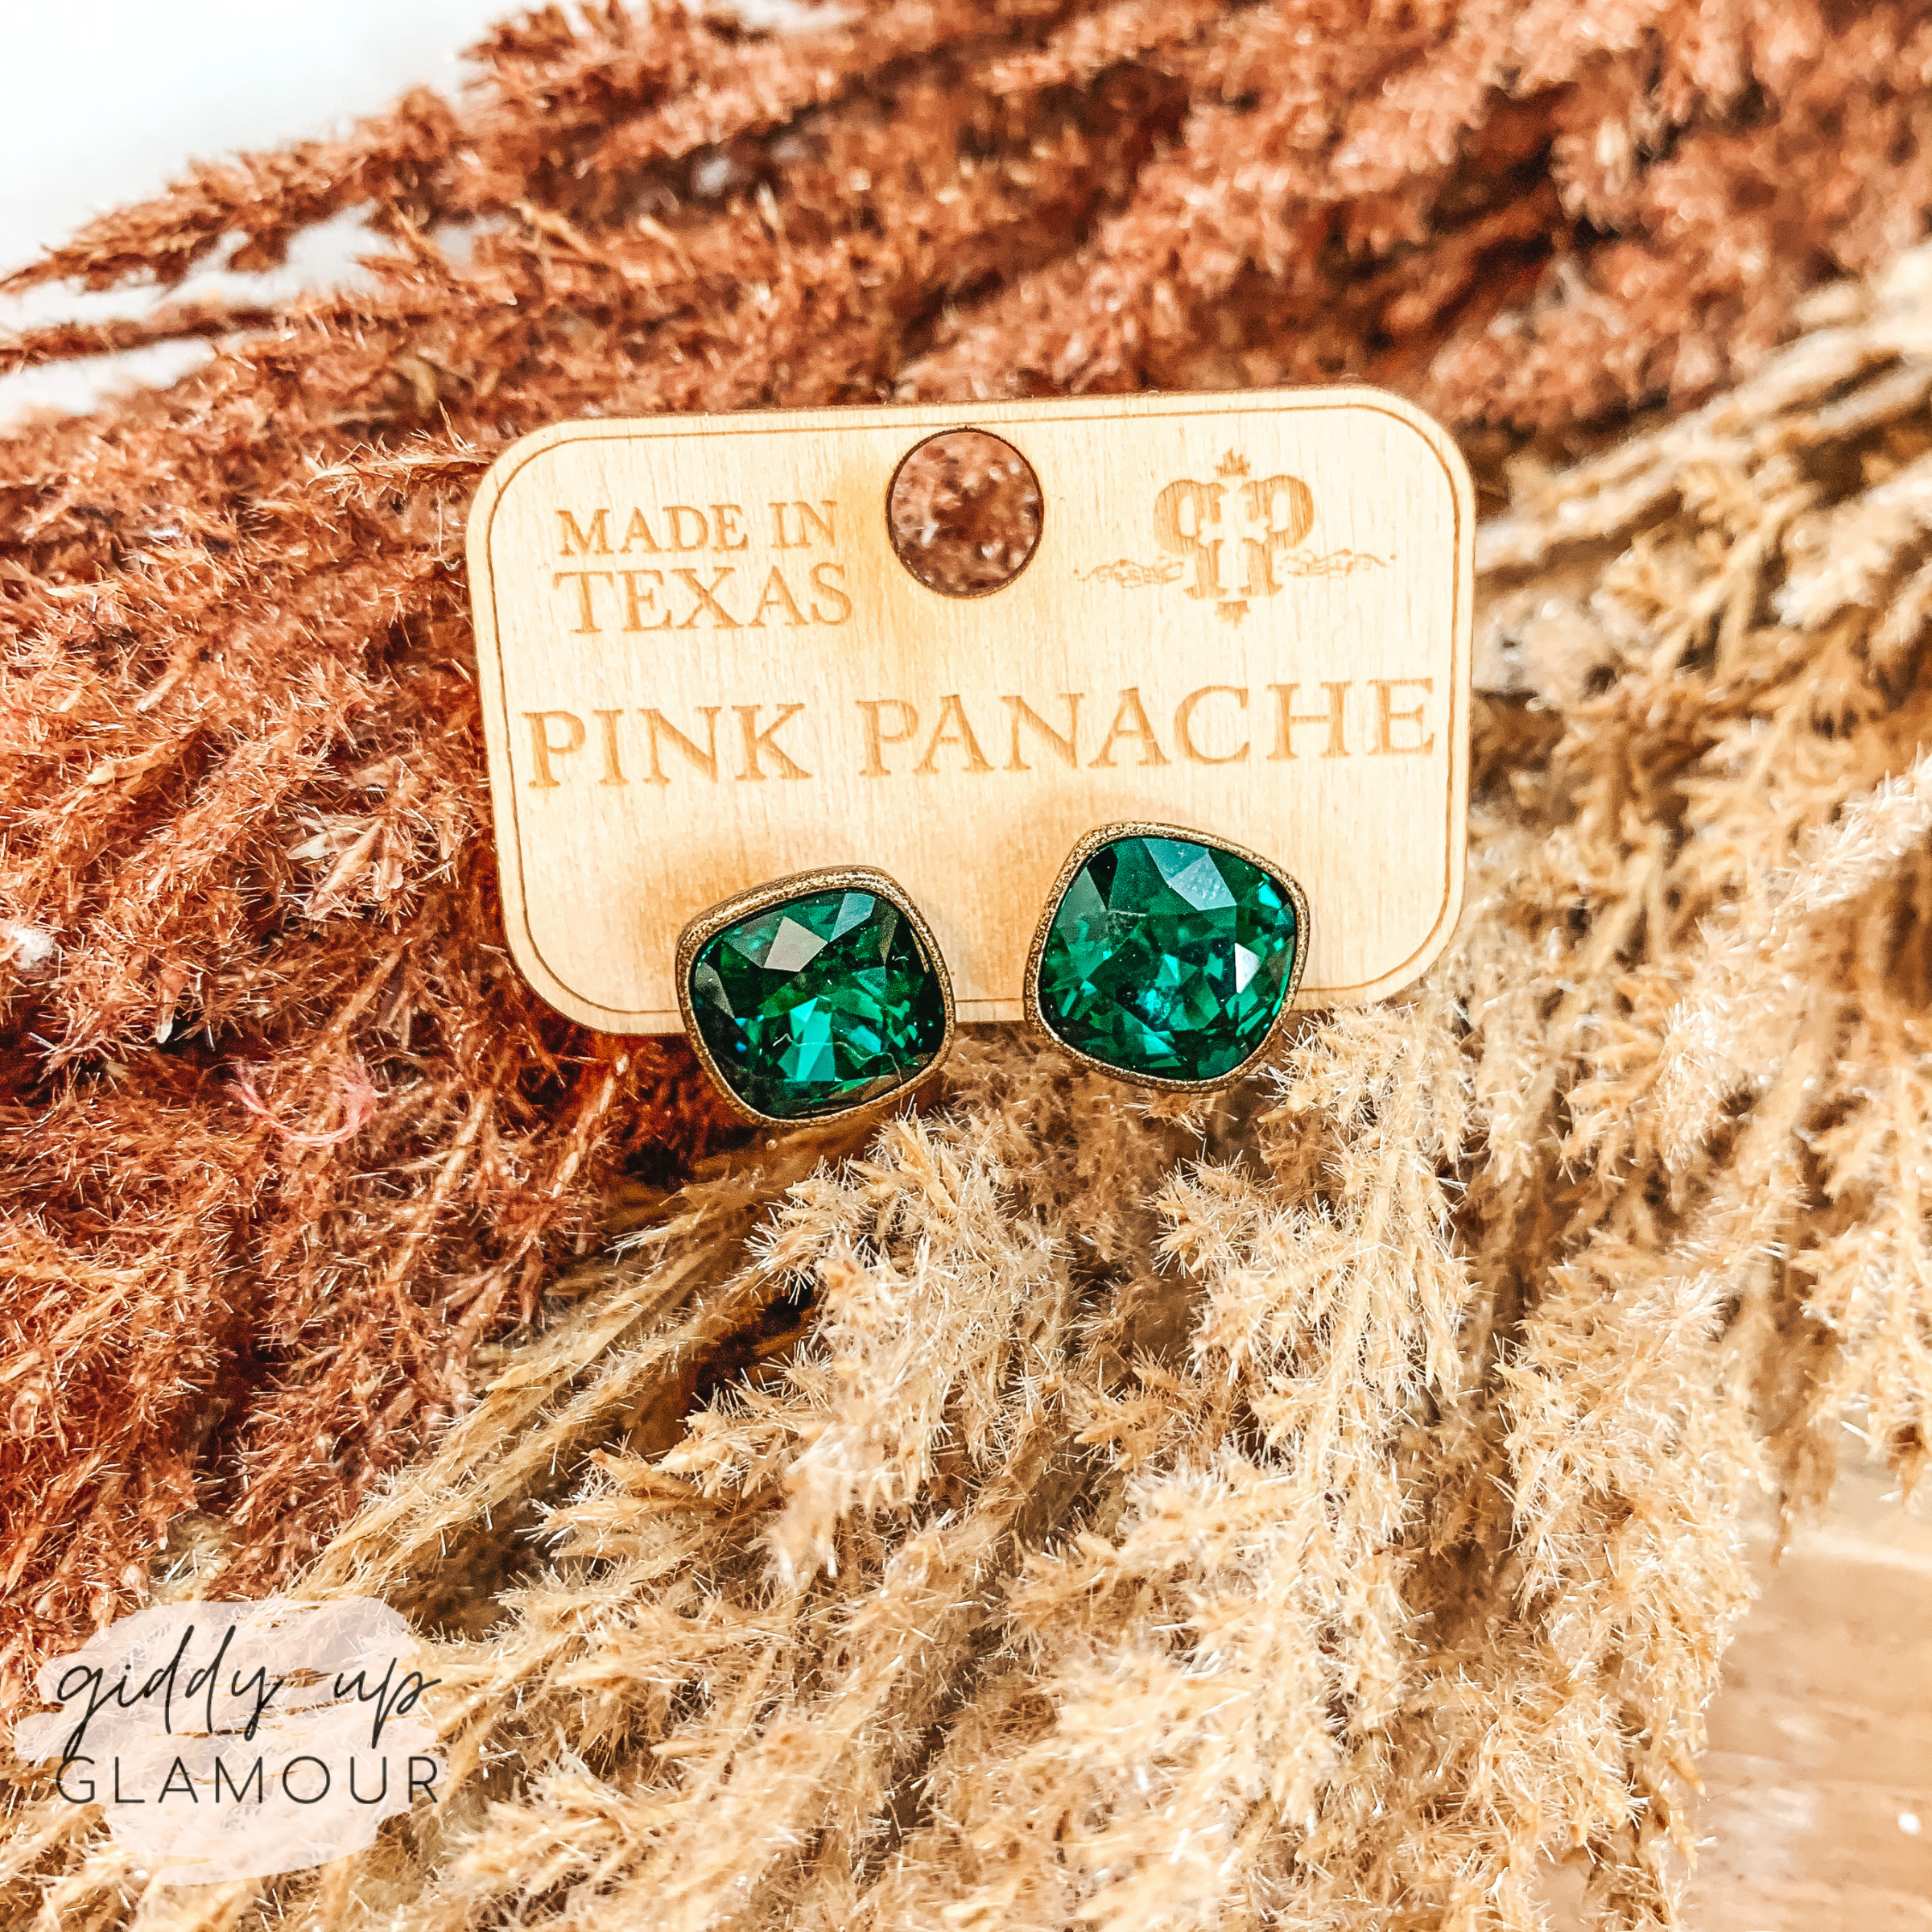 Pink Panache | Cushion Cut Bronze Stud Earrings with Emerald Green Crystals - Giddy Up Glamour Boutique